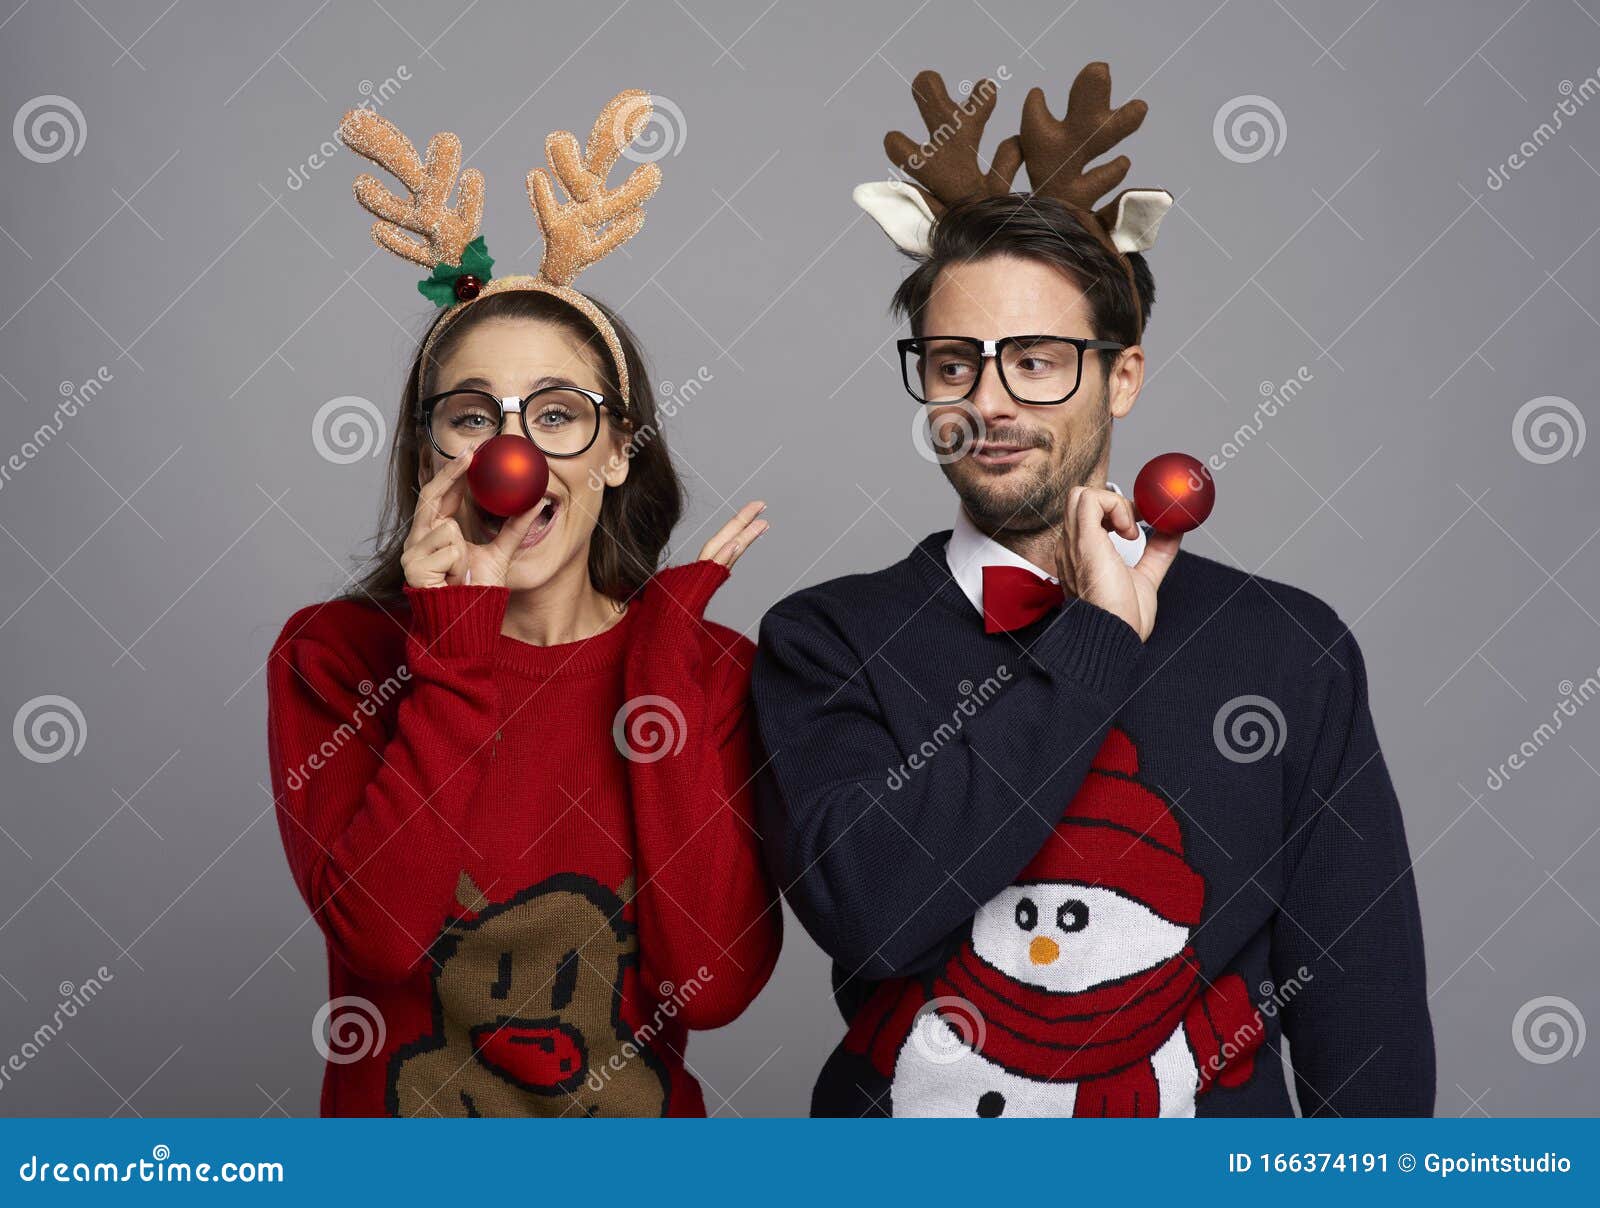 Nerd Couple in Christmas Time Stock Image - Image of look, bizarre ...